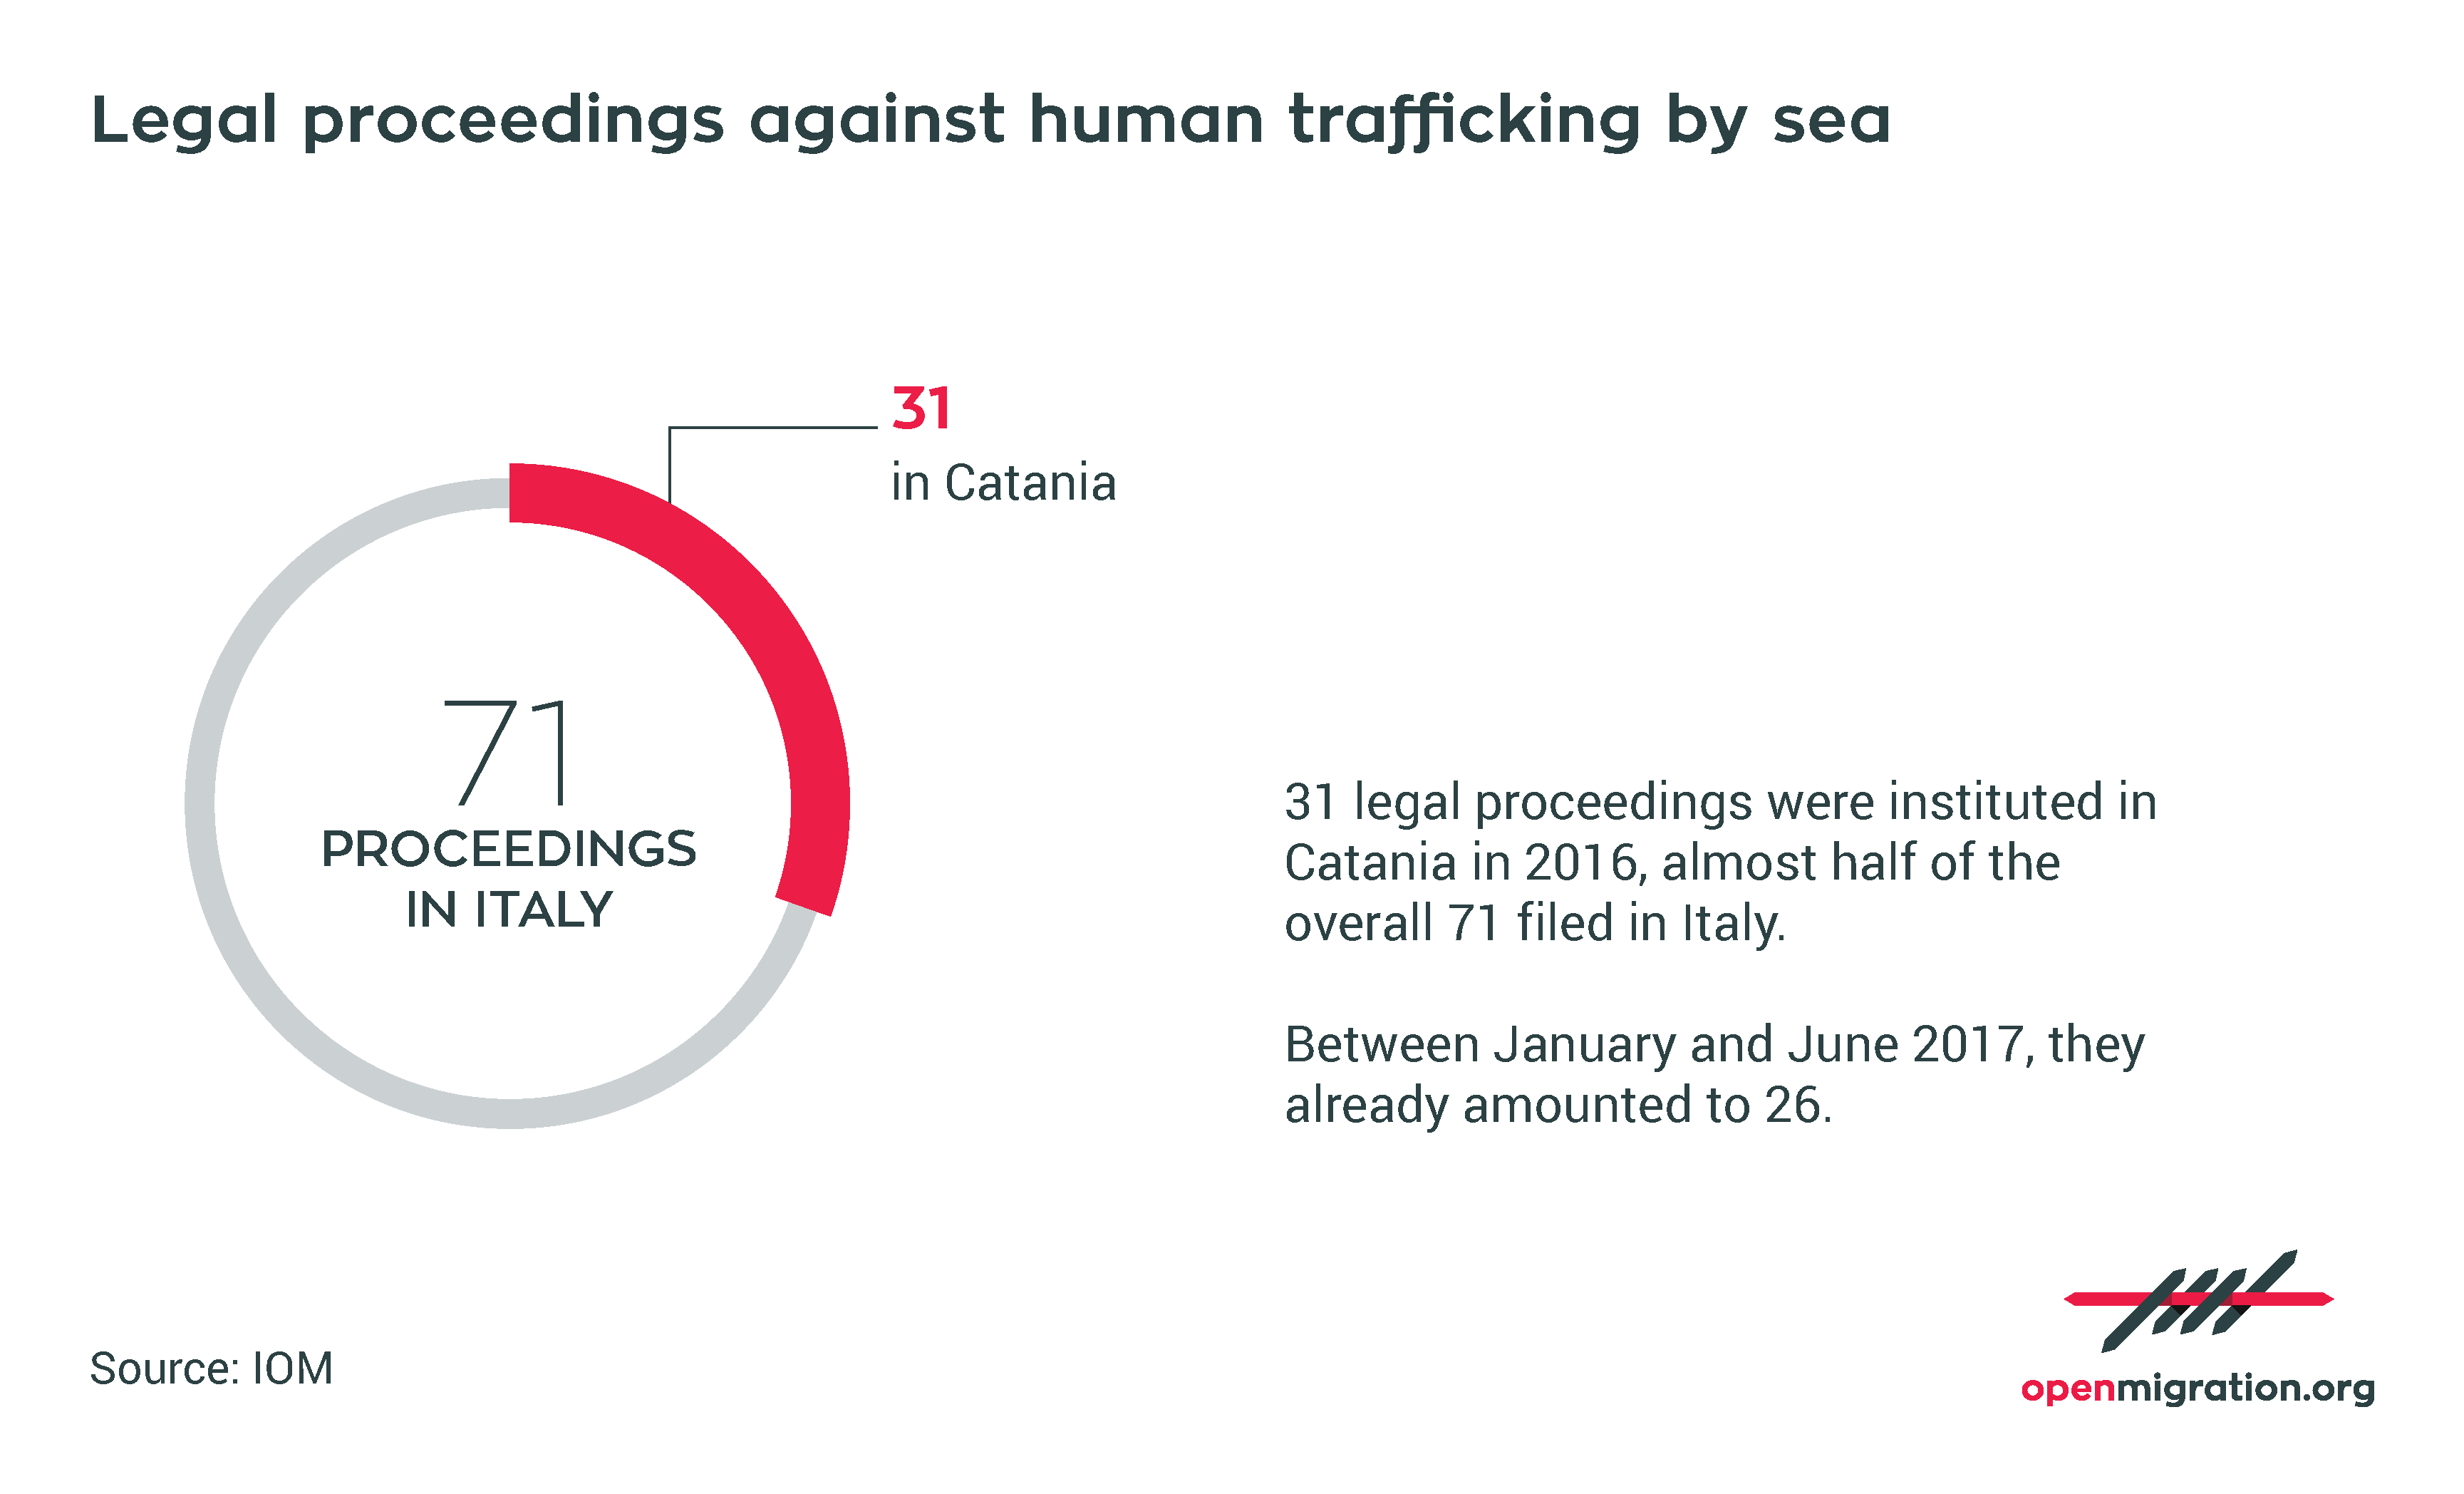 Legal proceedings against human traffickers in Italy